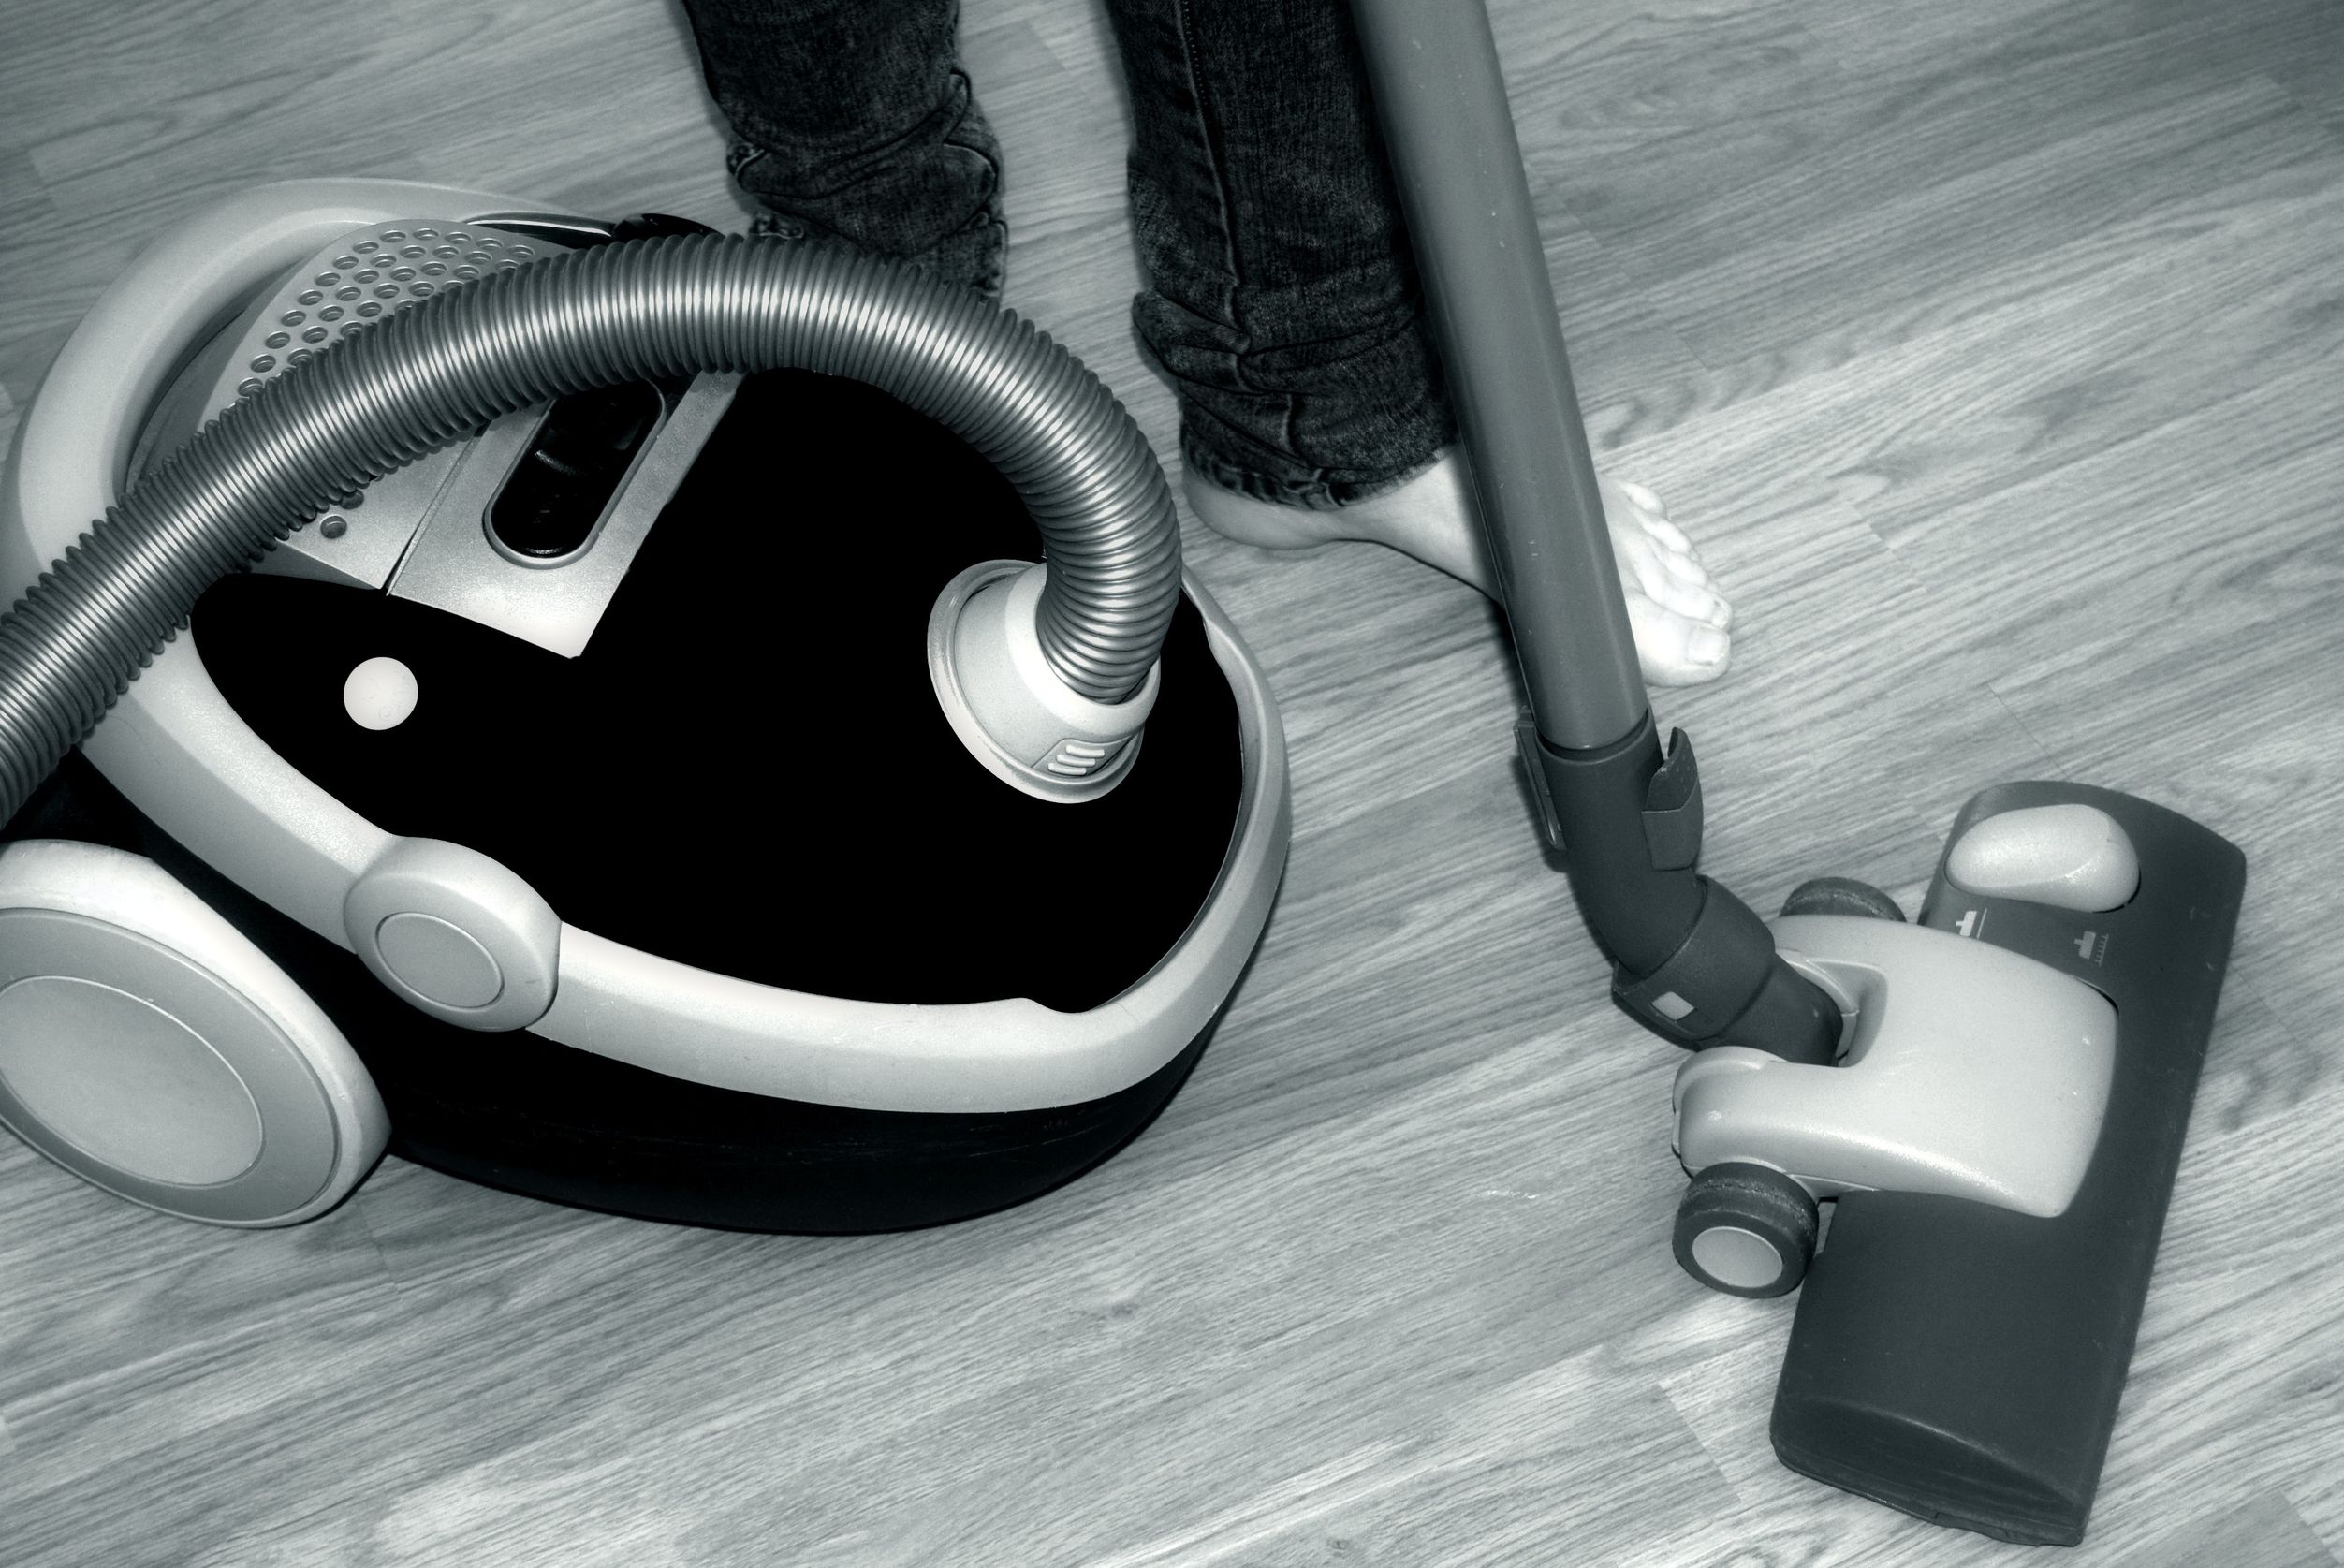 Benefits Of Hiring Affordable Carpet Cleaners In Fort Wayne IN